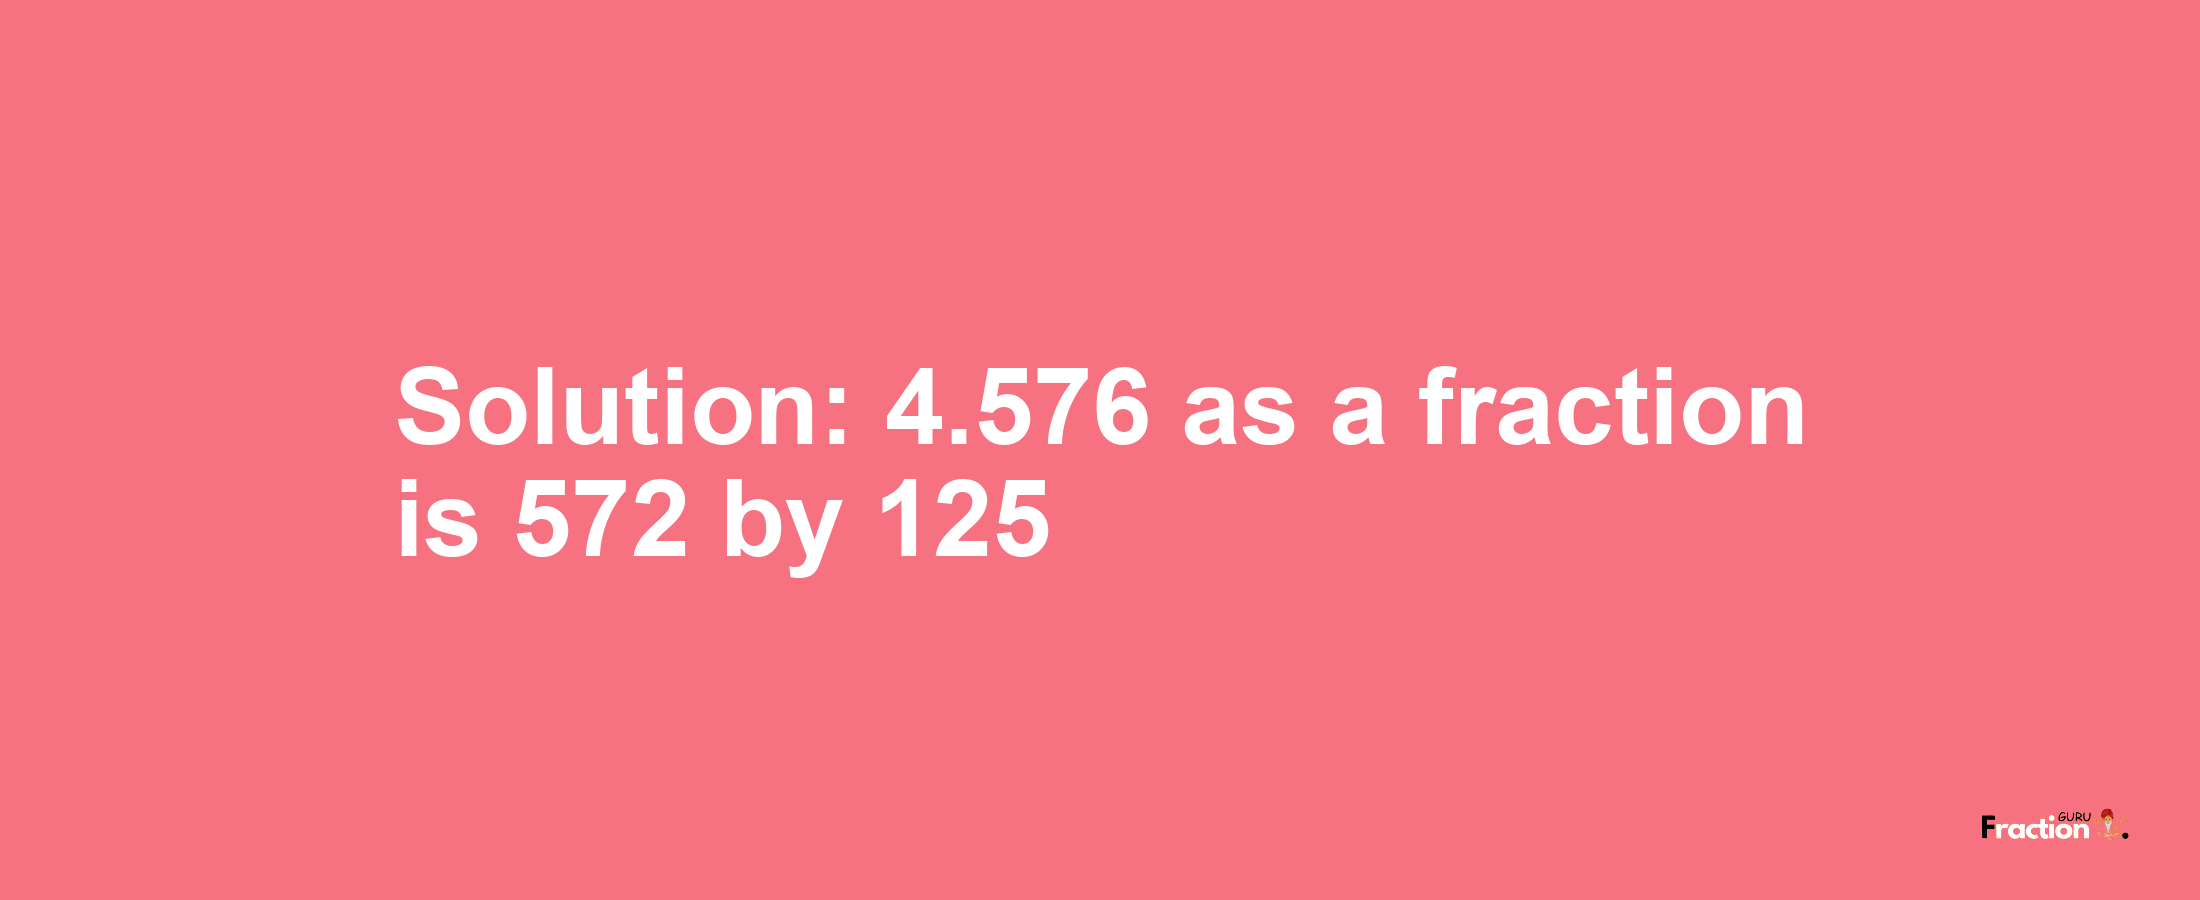 Solution:4.576 as a fraction is 572/125